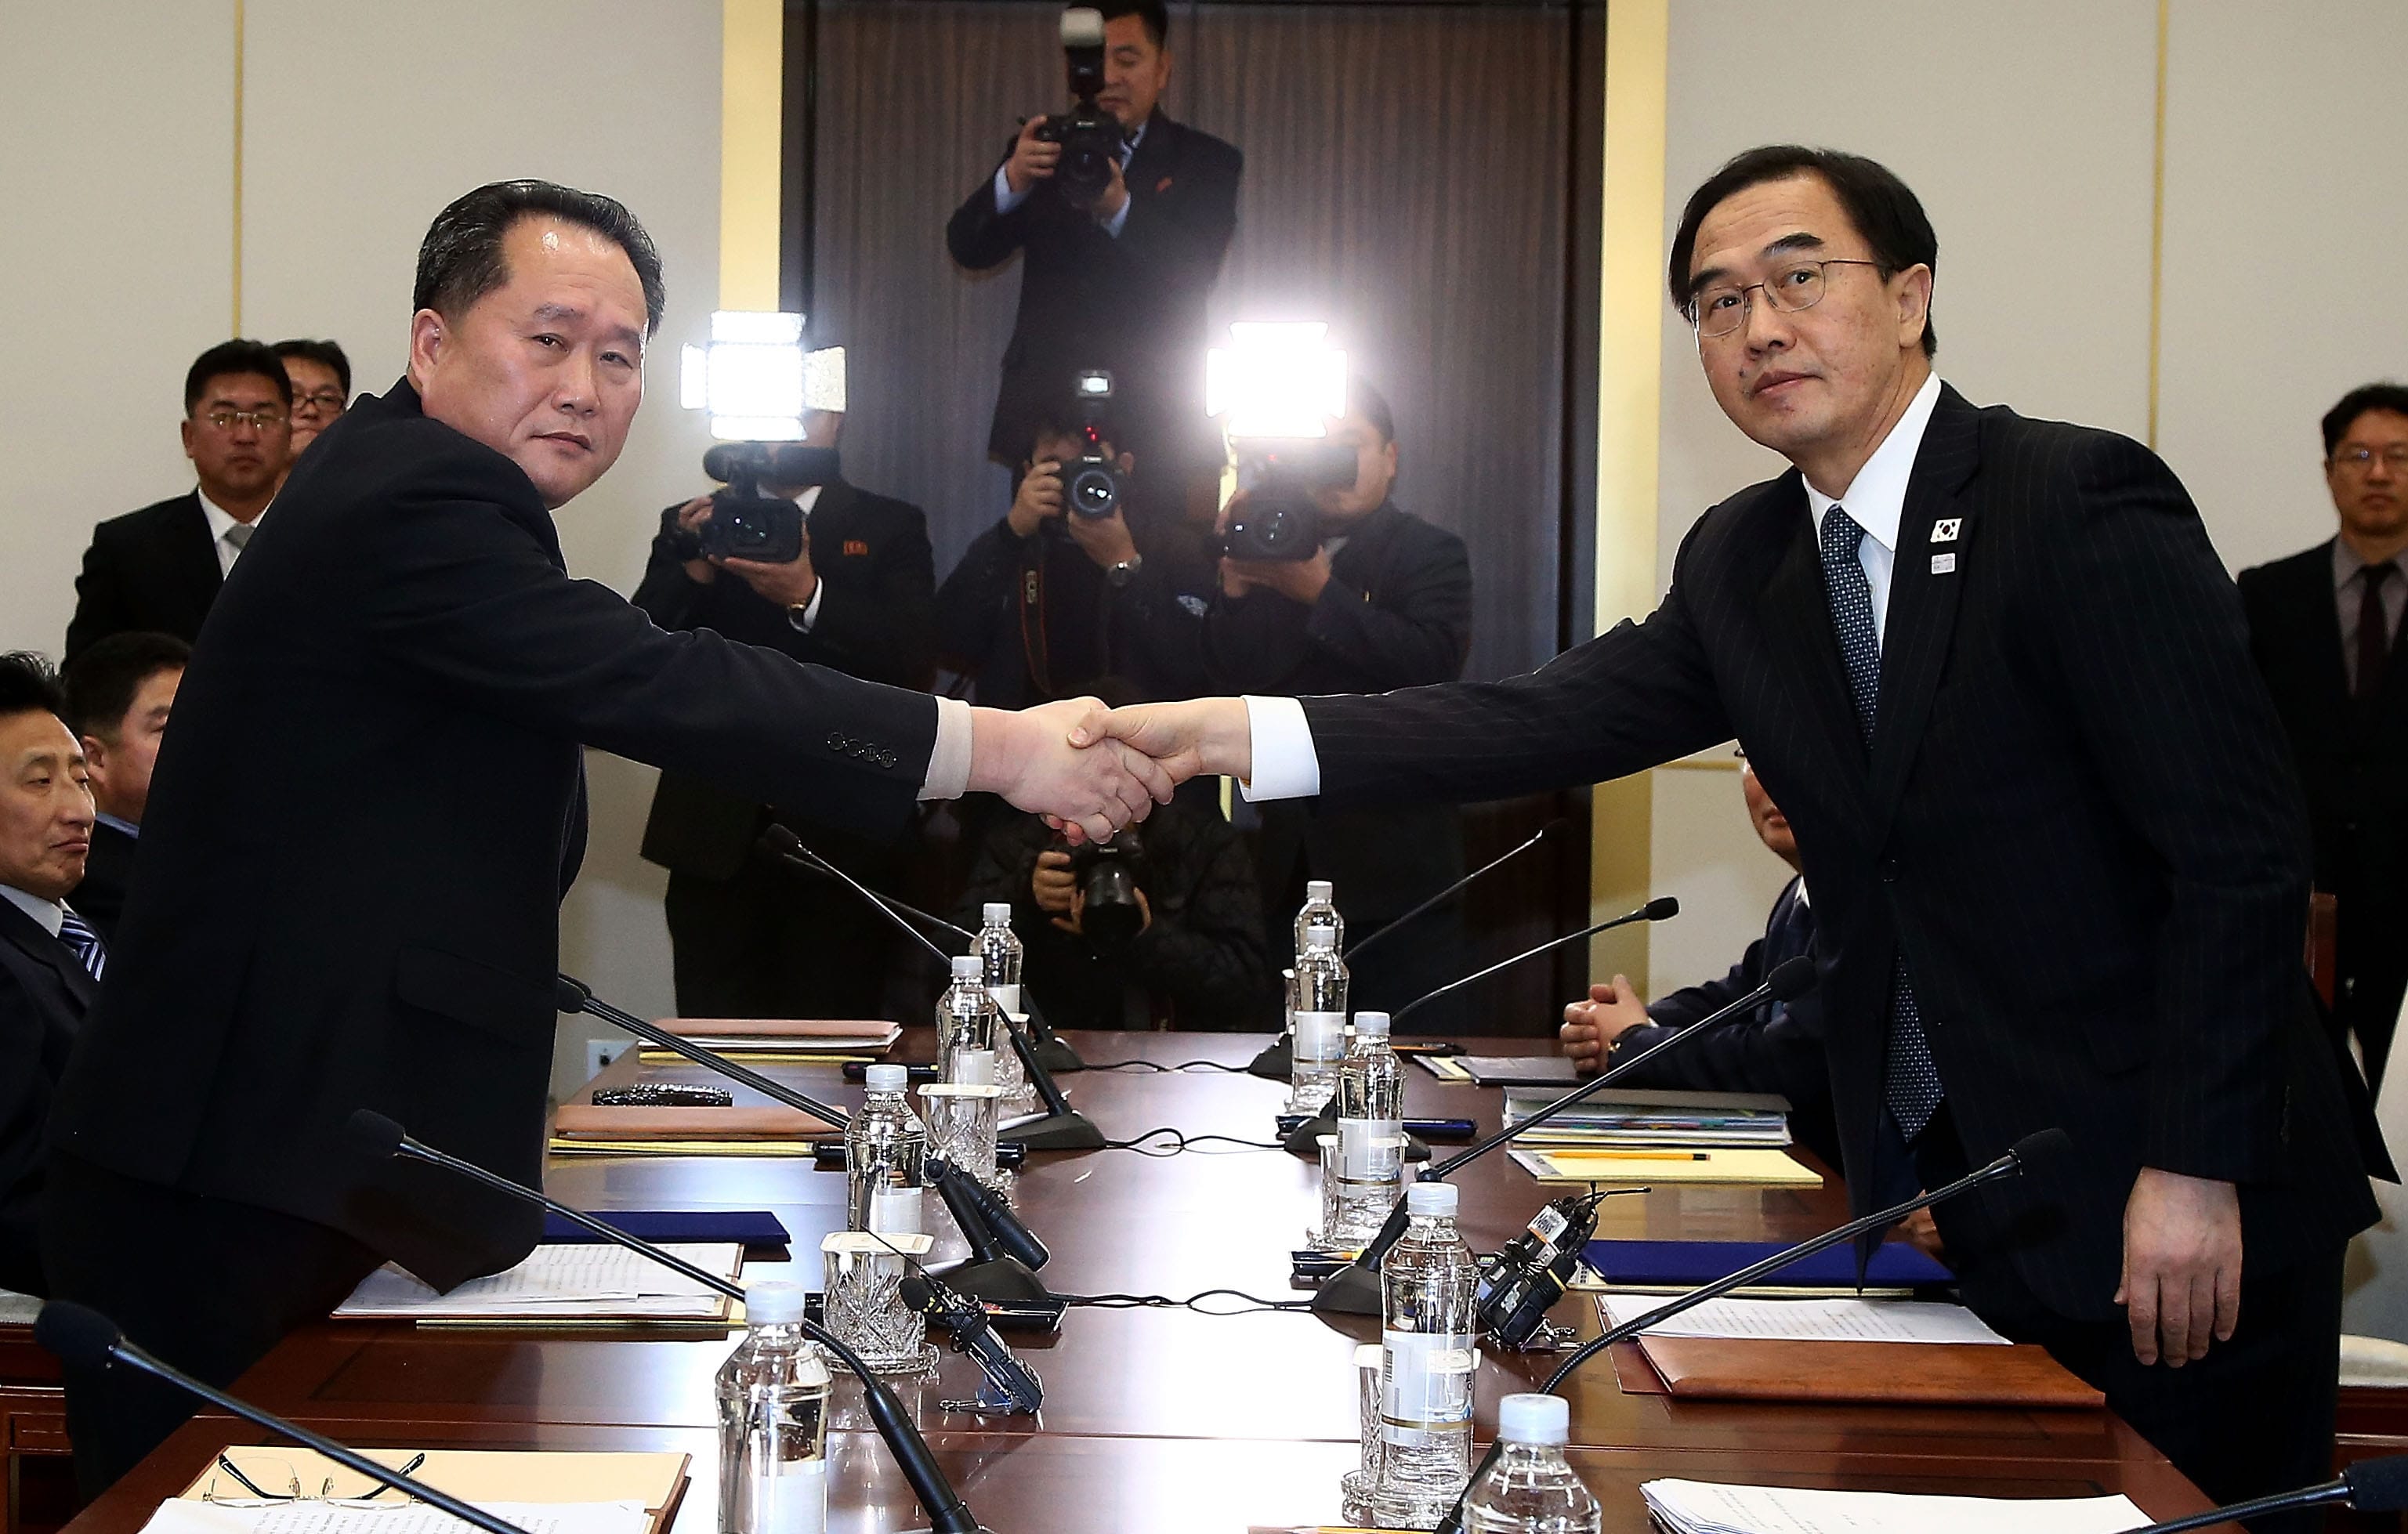 Delegates from North and South Korea meet in Panmunjom on 9 January (Photo: Getty Images)